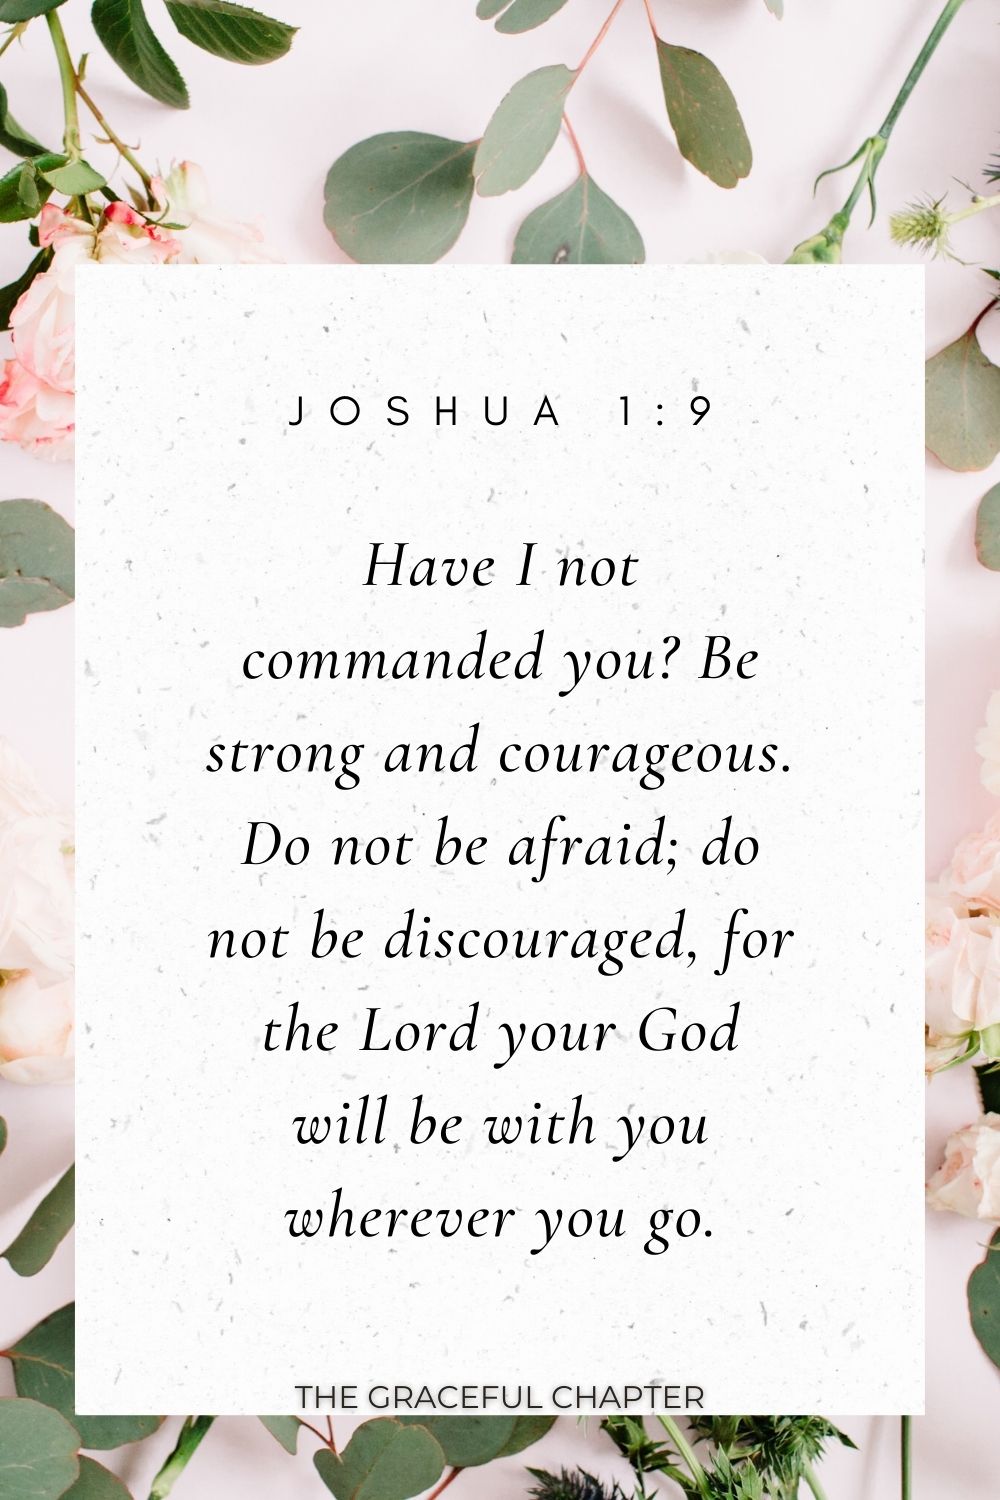 Have I not commanded you? Be strong and courageous. Do not be afraid; do not be discouraged, for the Lord your God will be with you wherever you go. Joshua 1:9